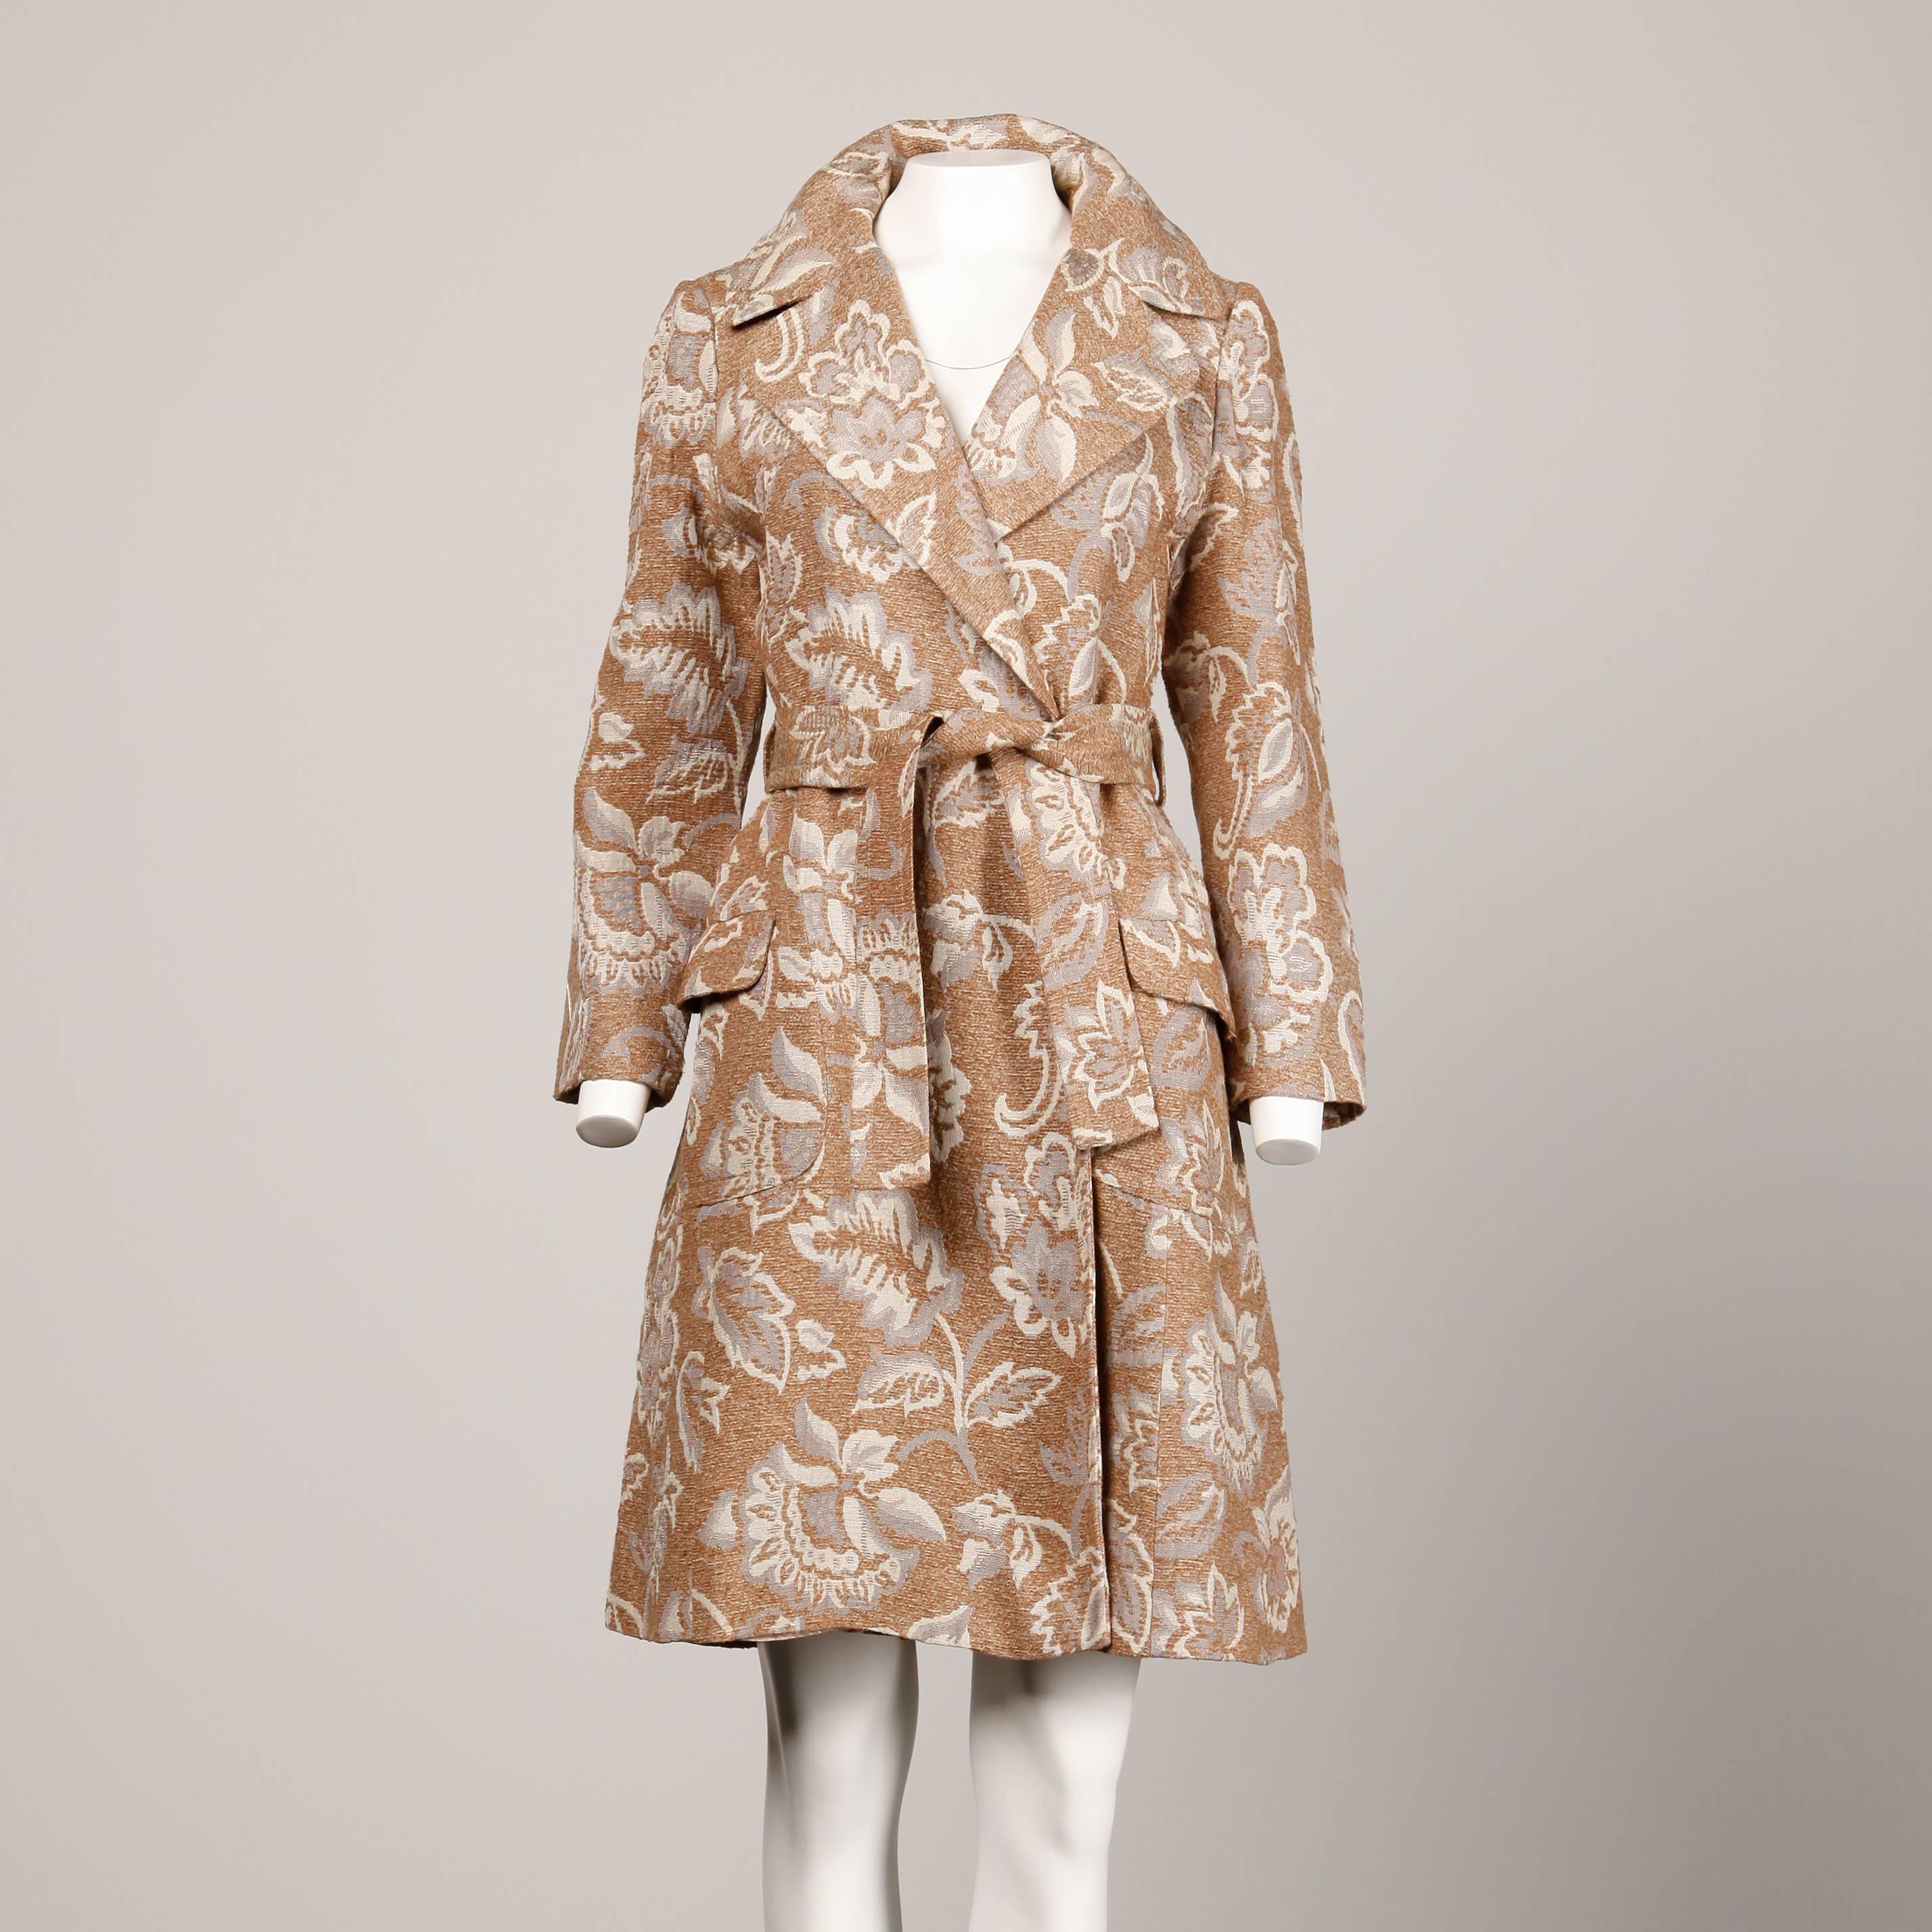 Chic 1970s tapestry coat by Lazarus in neutral tones of woven chenille. Matching wast sash and notched lapels.

Details: 

Fully Lined
Front Box Pockets
Snap Front Closure with Sash
Marked Size: Unmarked
Estimated Size: Small-Medium
Color: